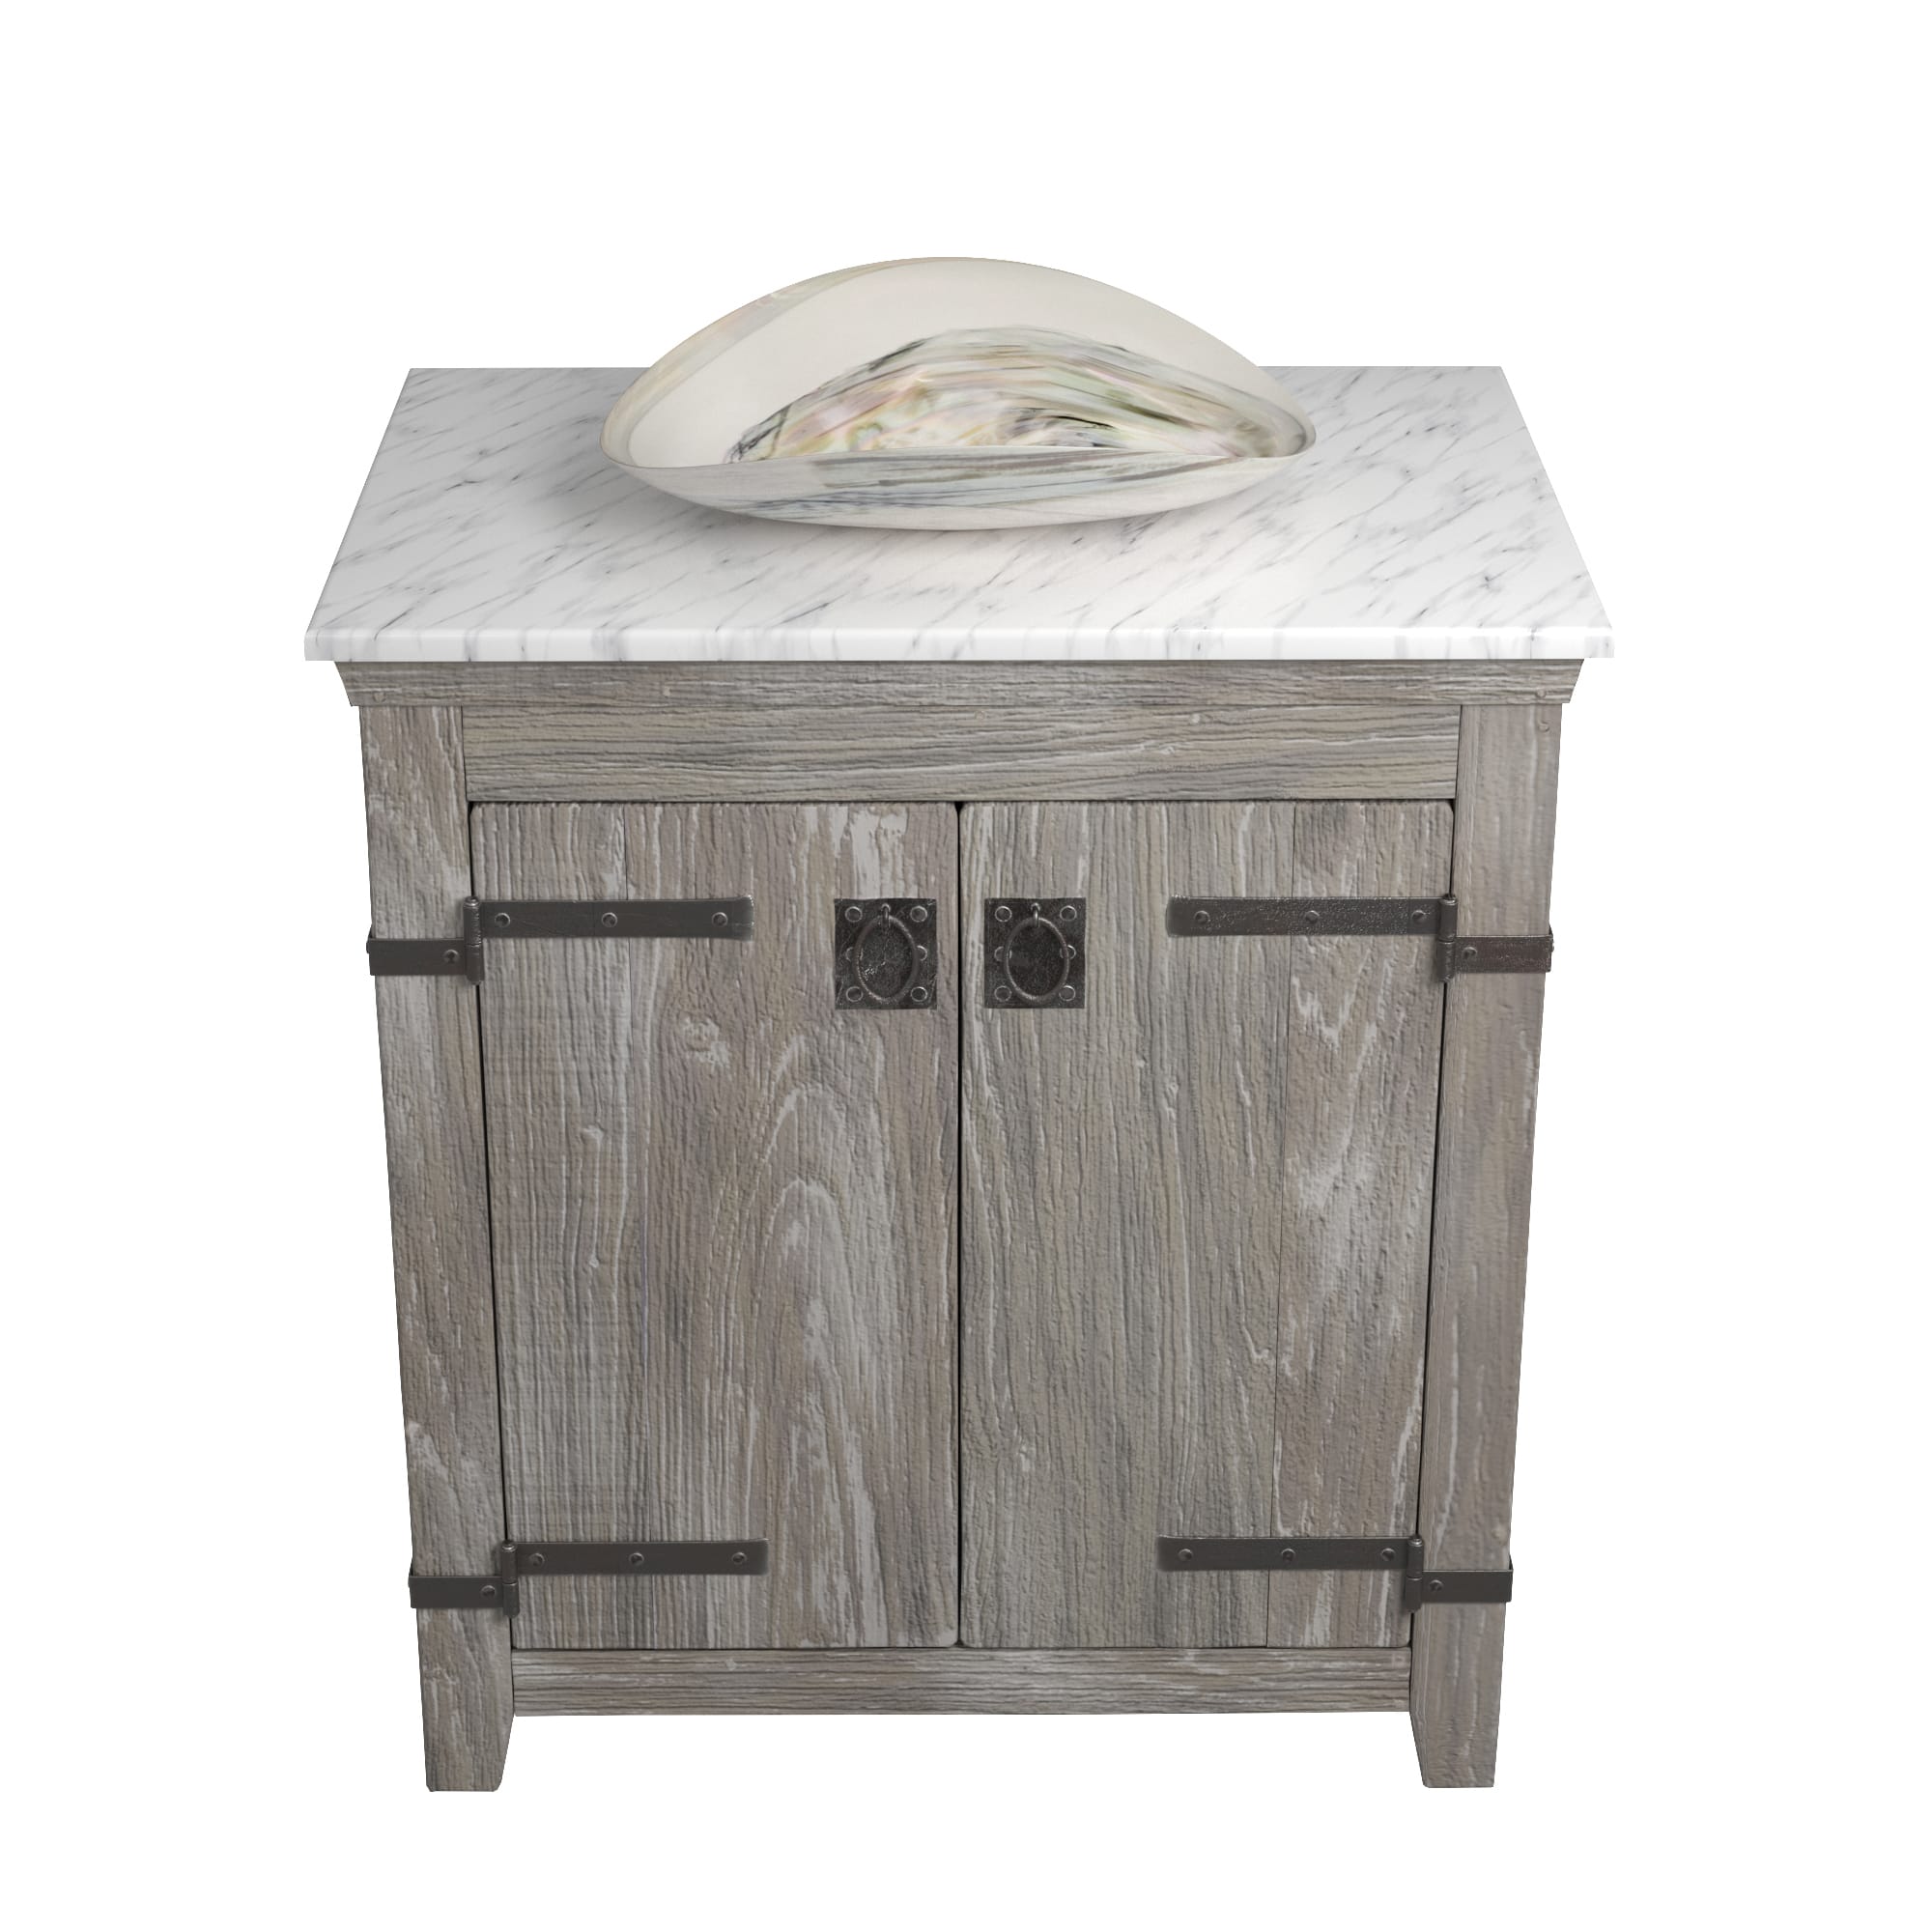 Native Trails 30" Americana Vanity in Driftwood with Carrara Marble Top and Verona in Abalone, Single Faucet Hole, BND30-VB-CT-MG-063